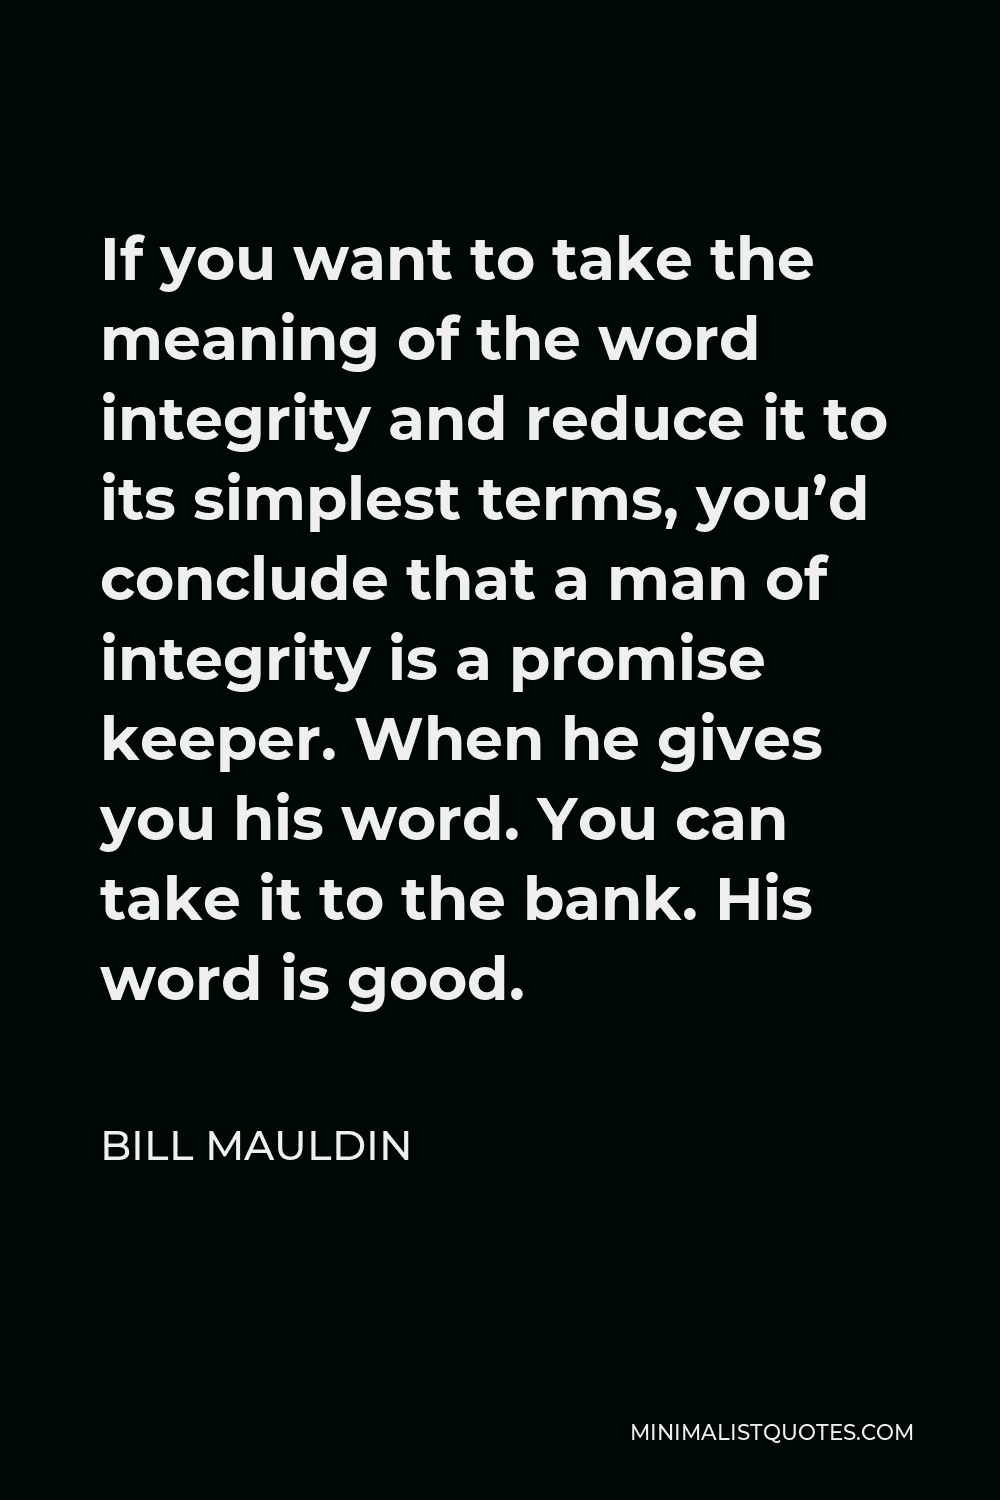 Bill Mauldin Quote - If you want to take the meaning of the word integrity and reduce it to its simplest terms, you’d conclude that a man of integrity is a promise keeper. When he gives you his word. You can take it to the bank. His word is good.